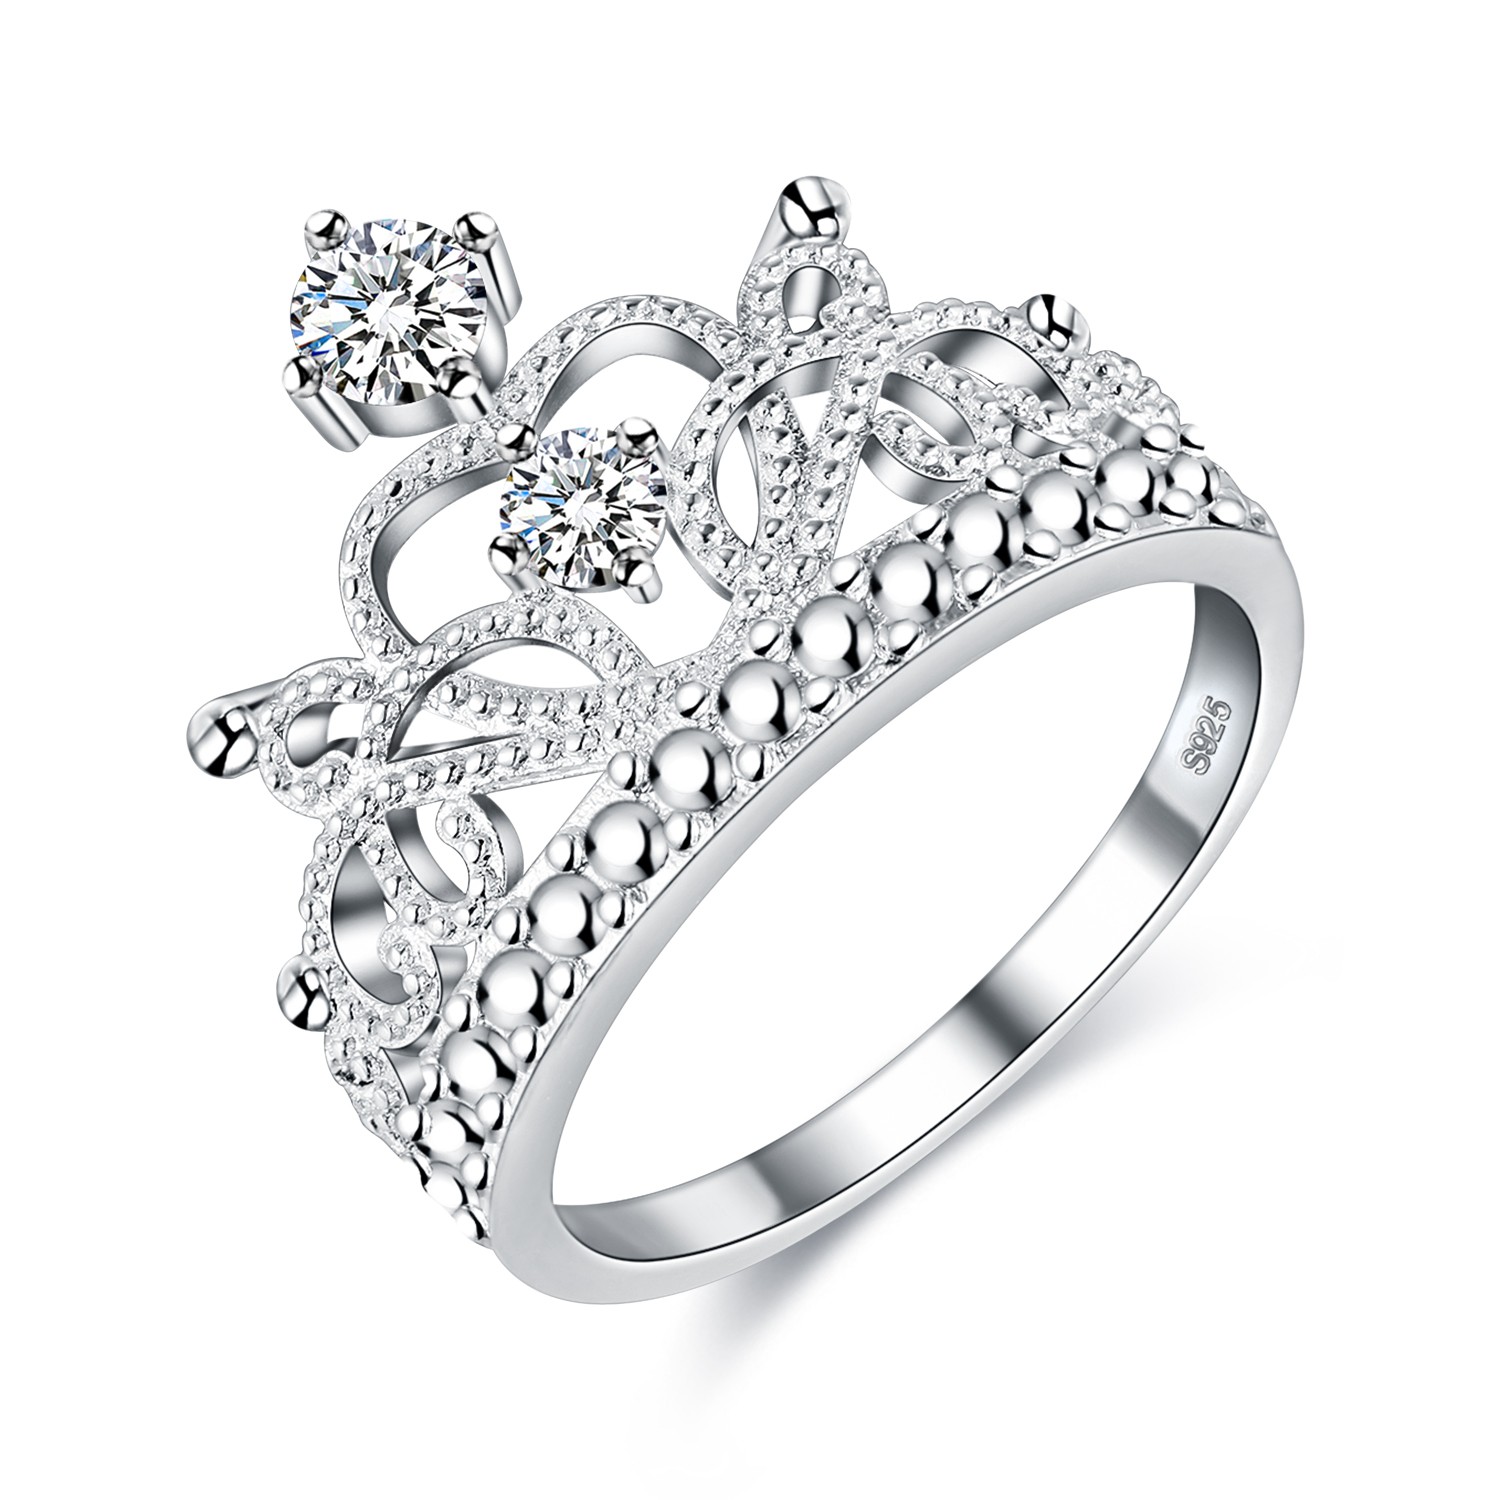 S925 Sterling Silver Crown Princess Promise Ring For Her